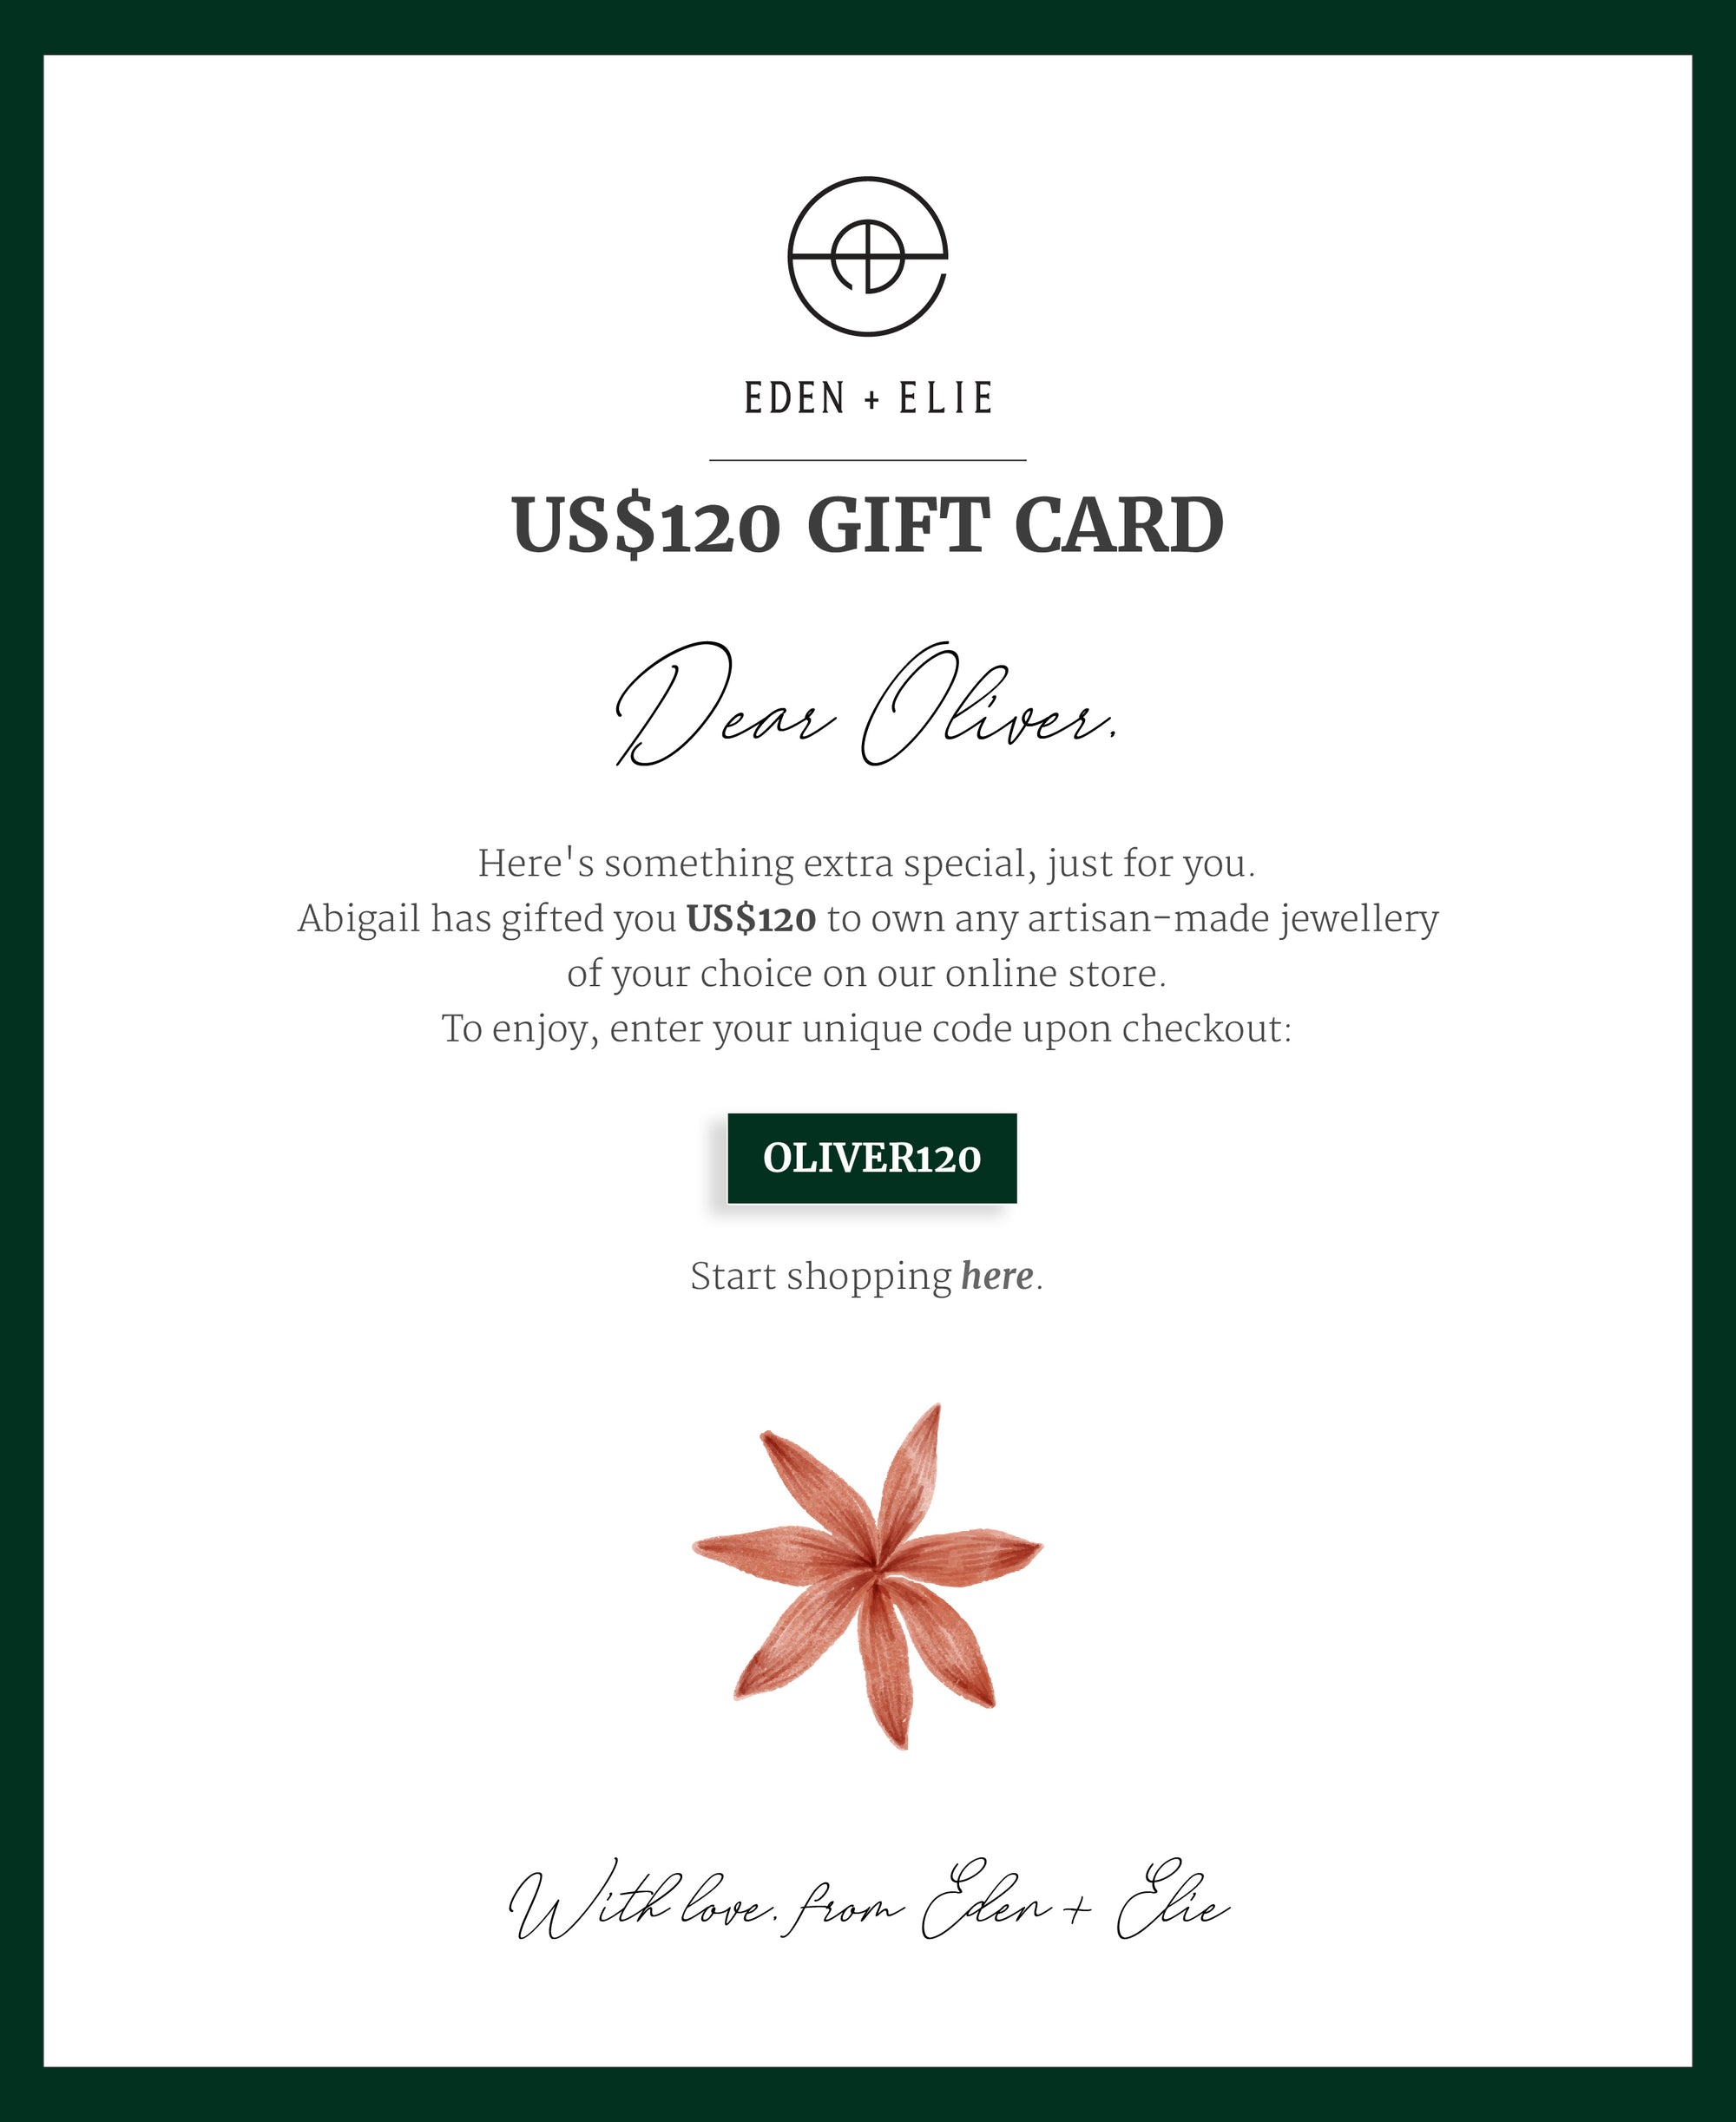 EDEN + ELIE Personalized E-Gift Card - $120